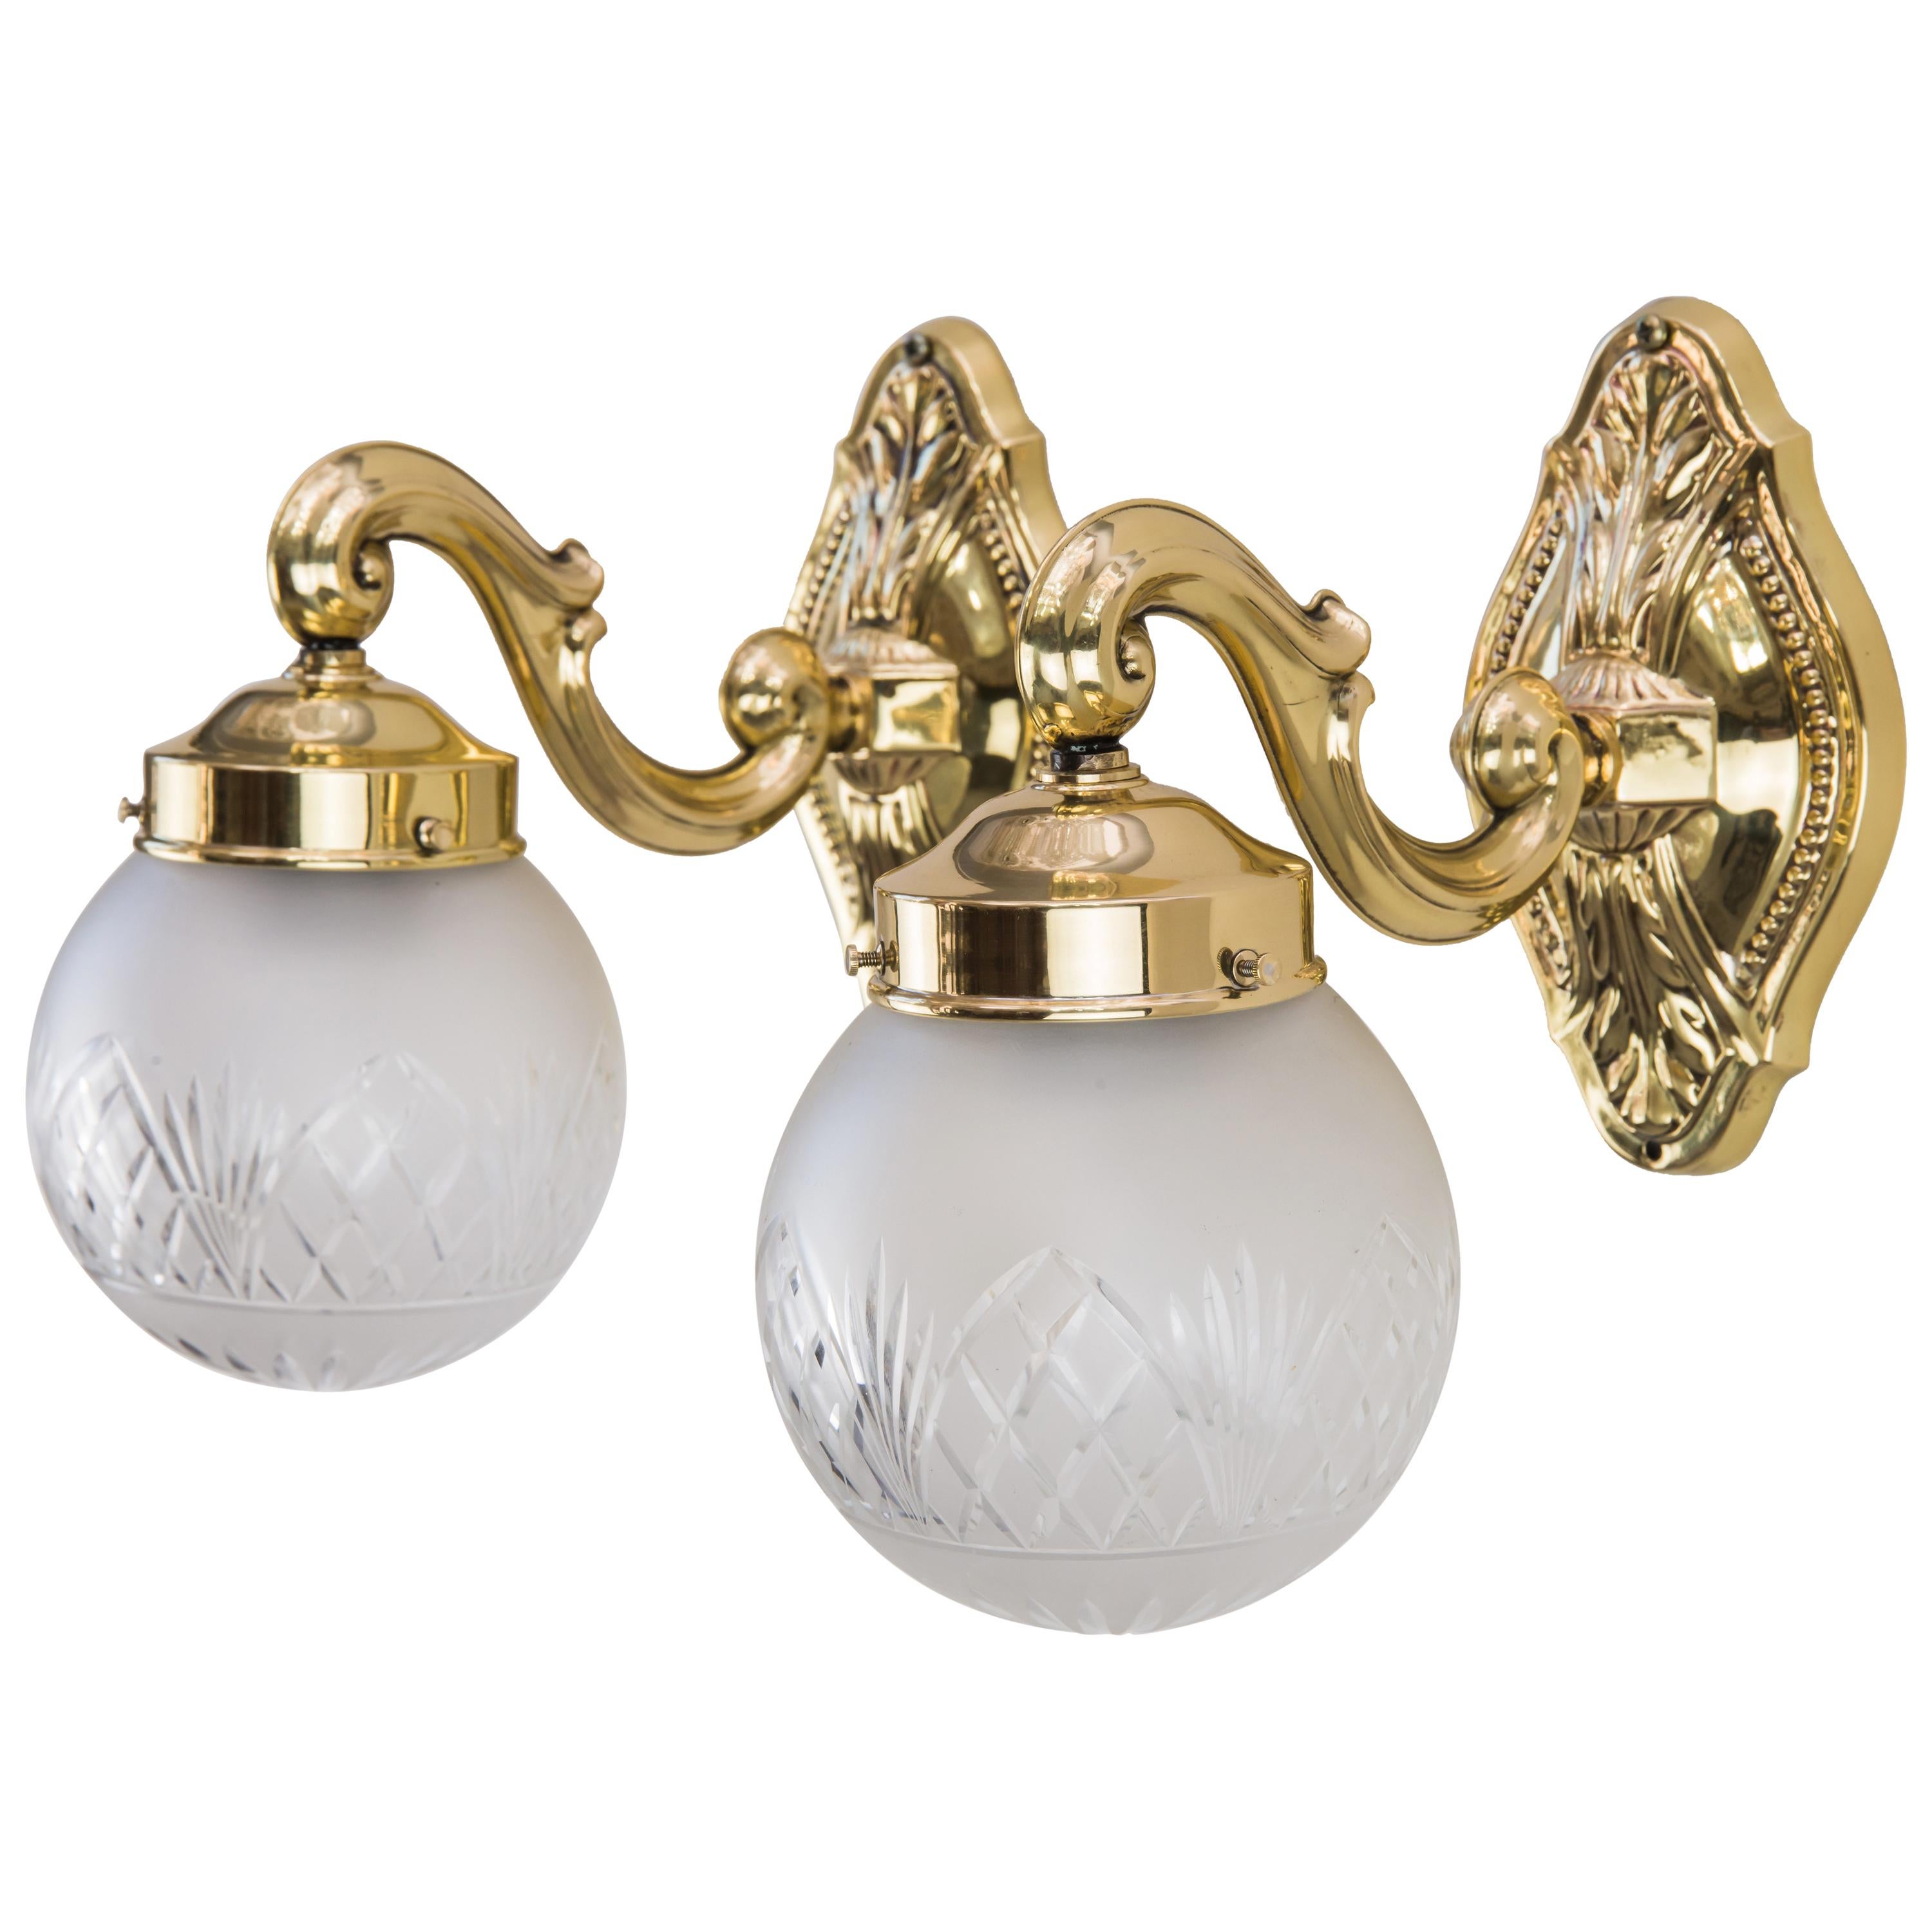 Two Historistic Wall sconces around 1890s with original cut glass shades